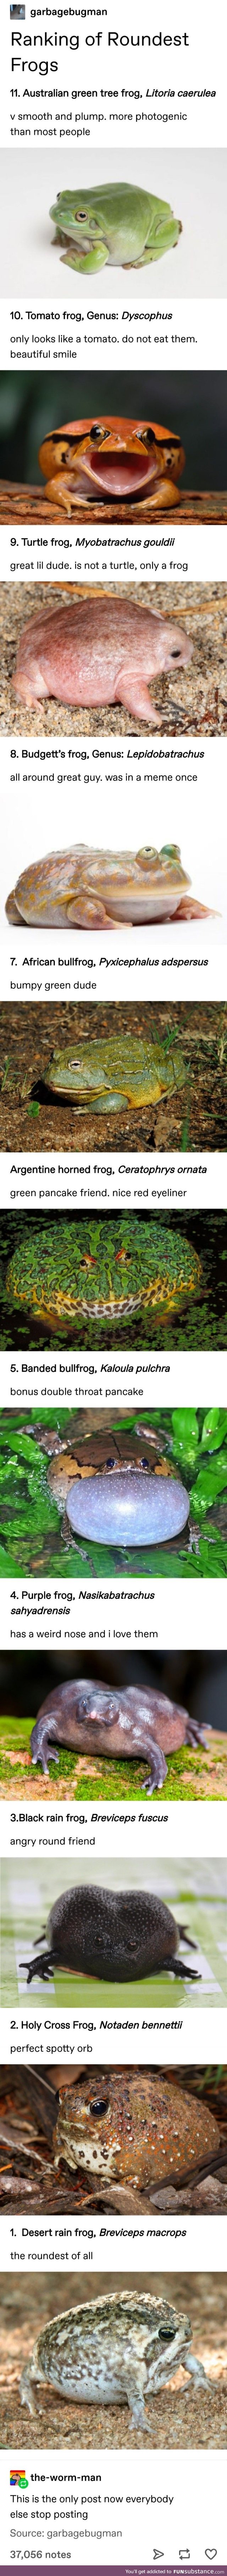 Ranking roundest frogs